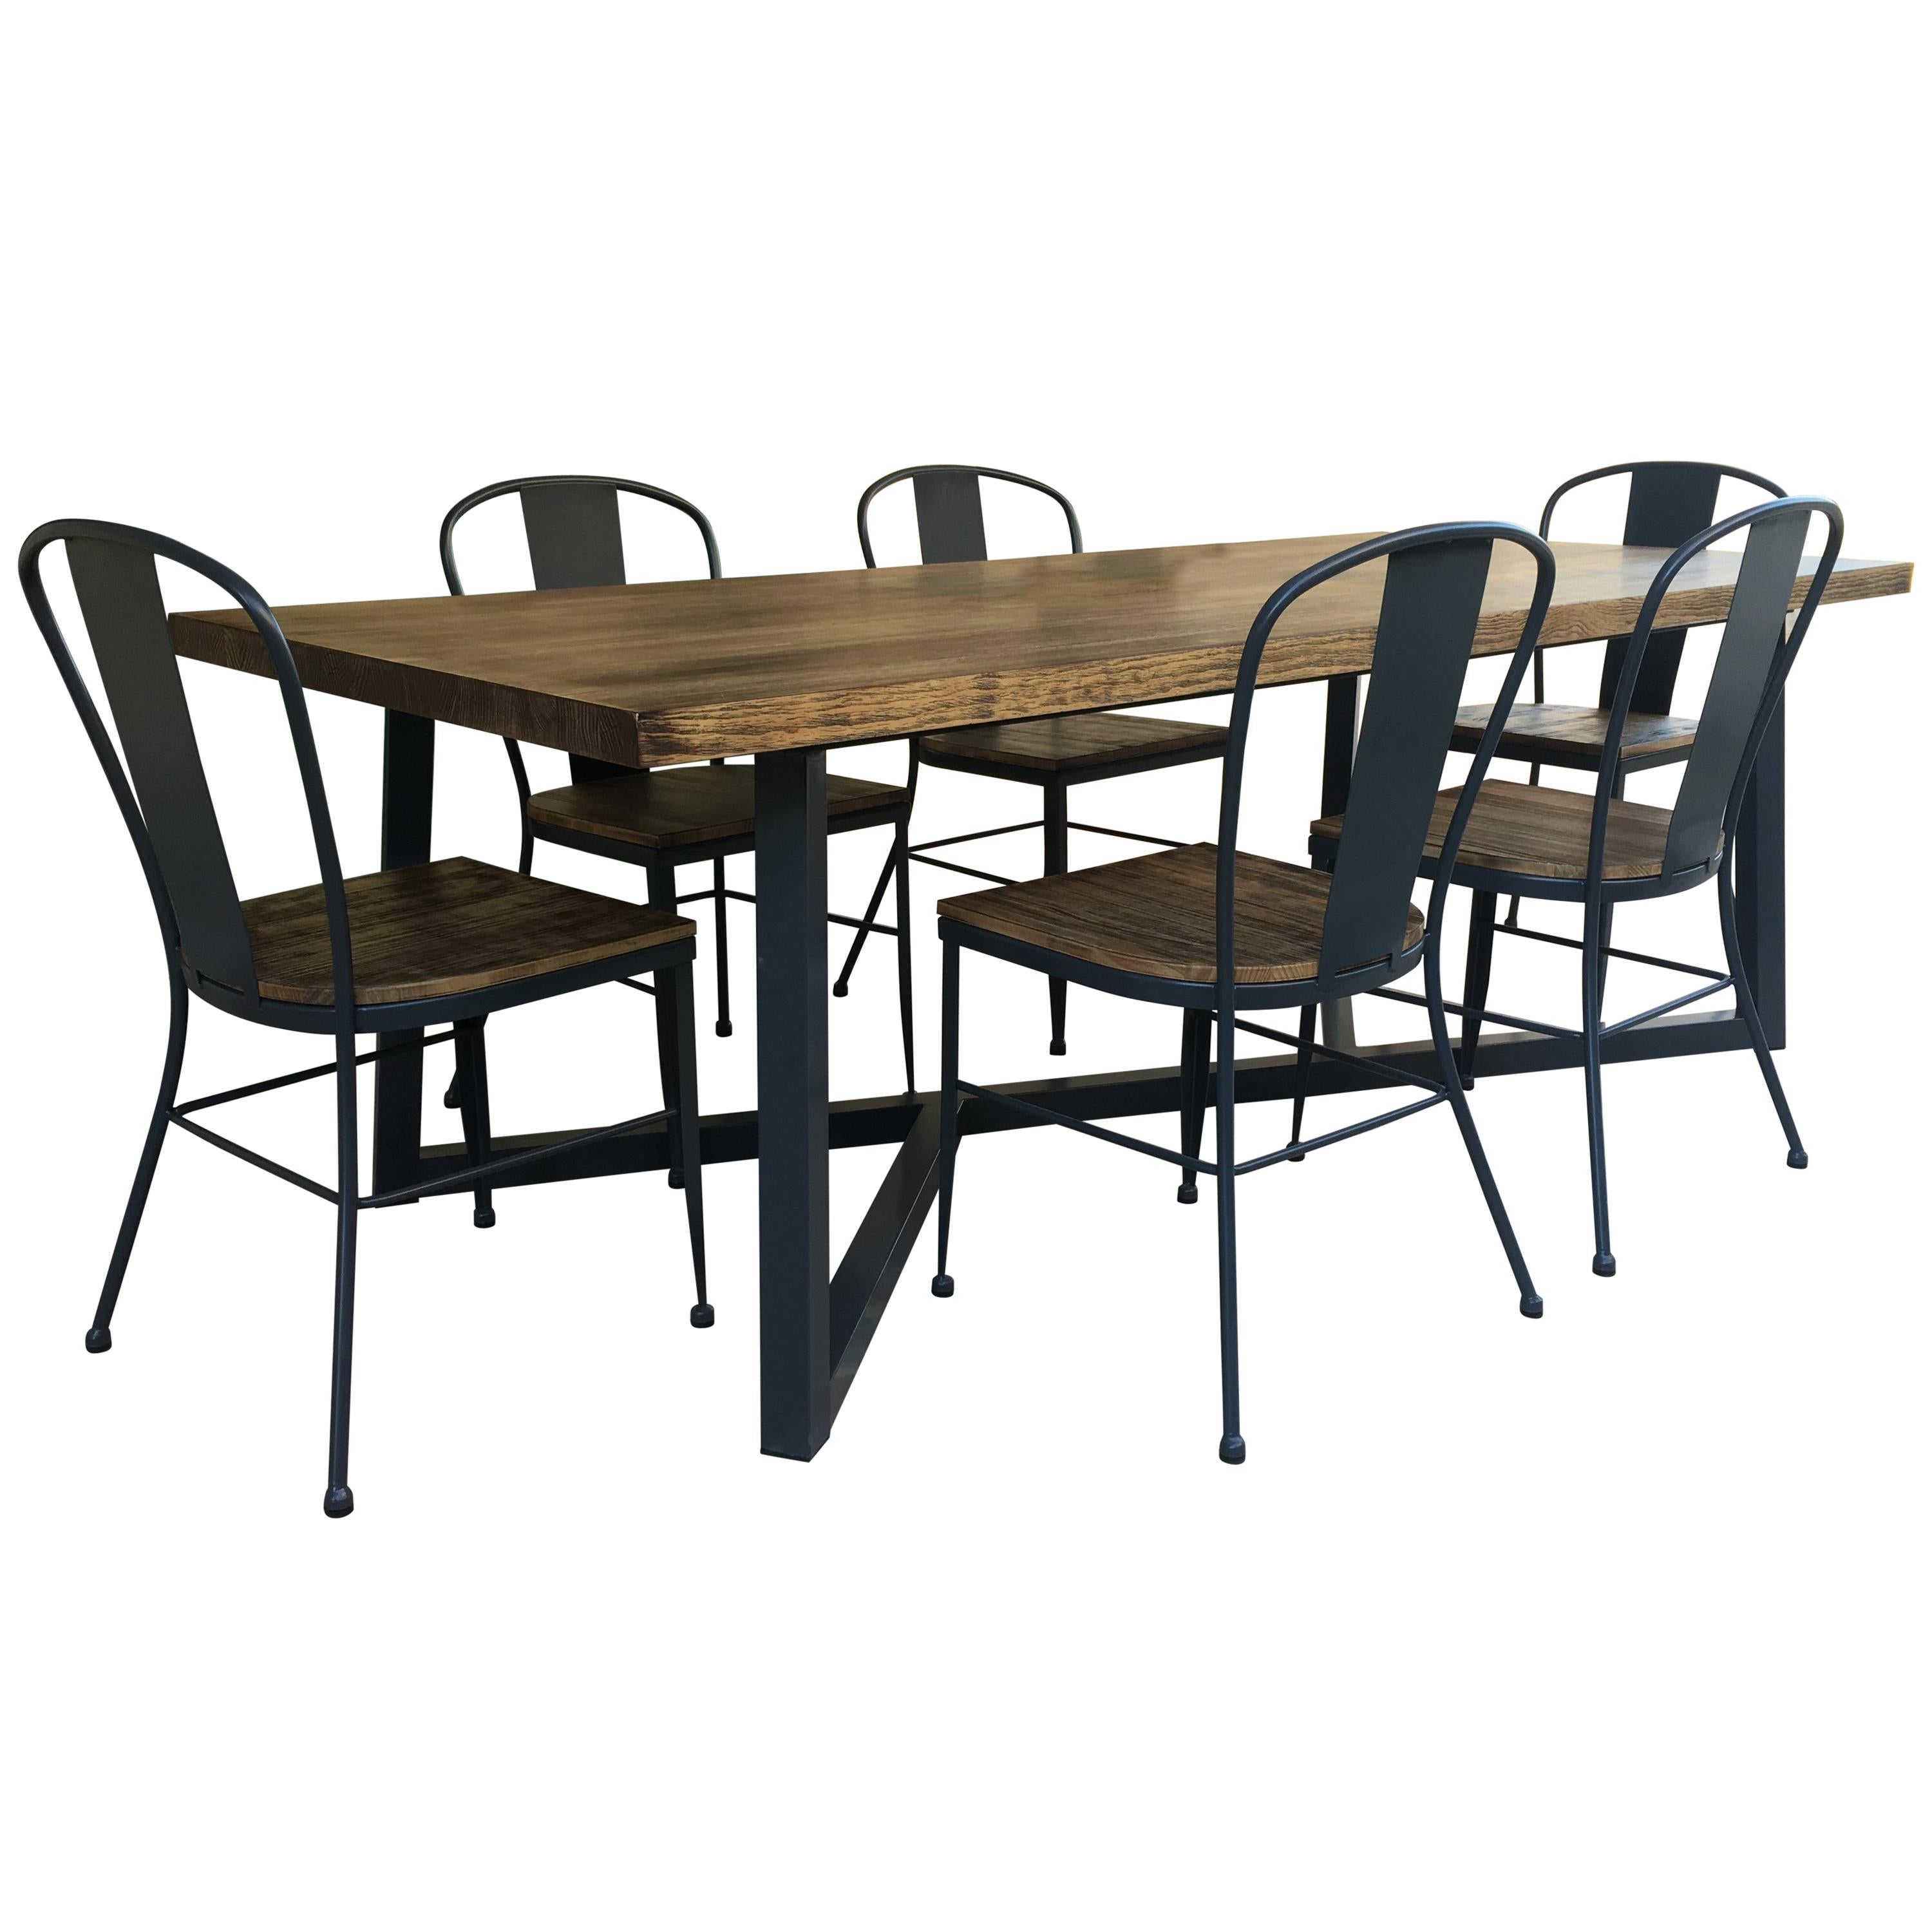 21st Century Wrought Iron Set of Patio Dining Table & Chairs. Indoor & Outdoor For Sale